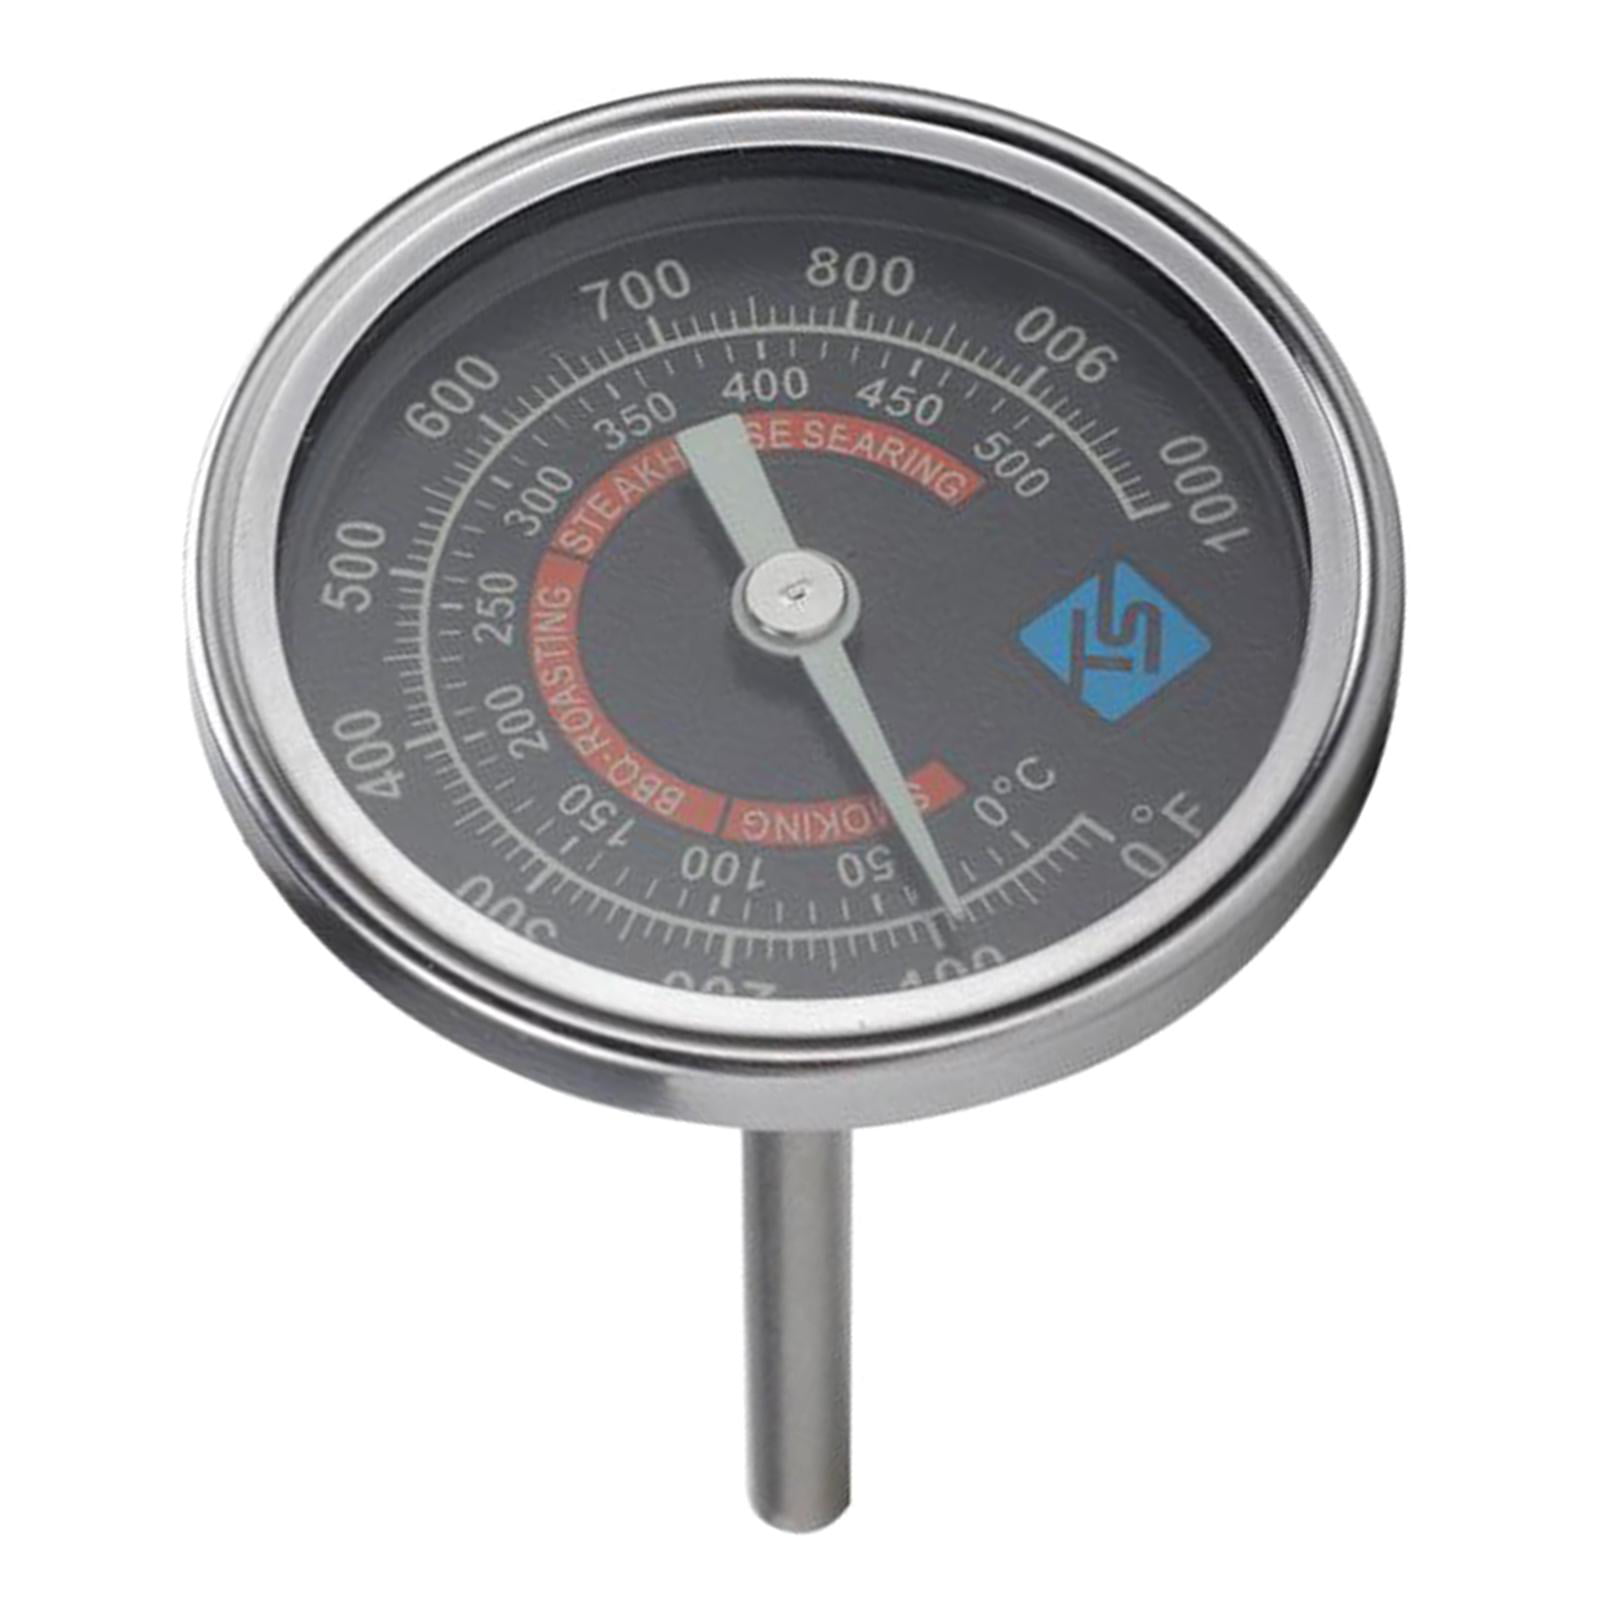 Stainless Steel 50500℃Barbecue BBQ Pit Smoker Grill Gauge Temp Thermometer V4L7. 